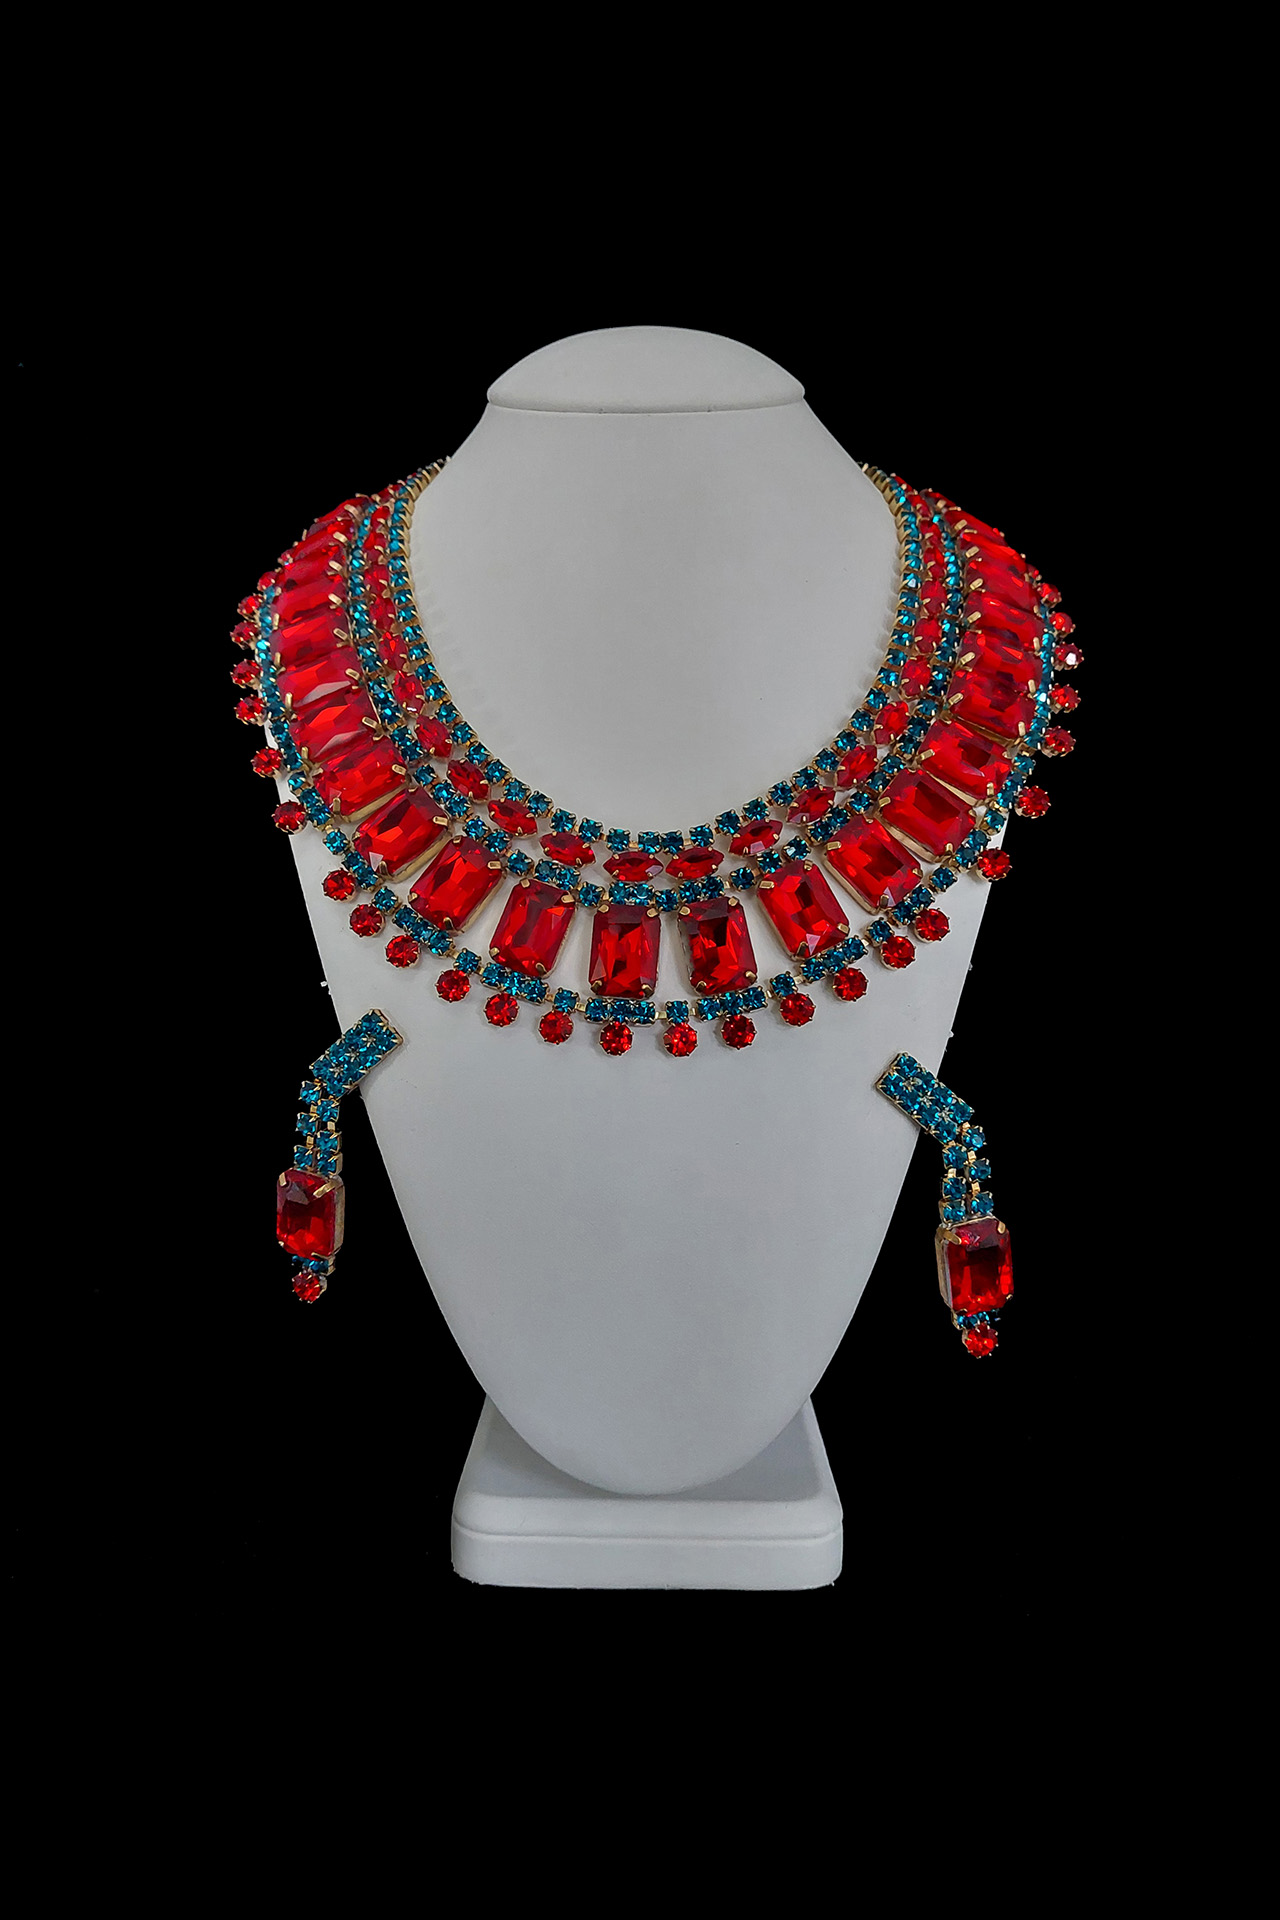 Handmade earrings and necklace set Edite from red rhinestones